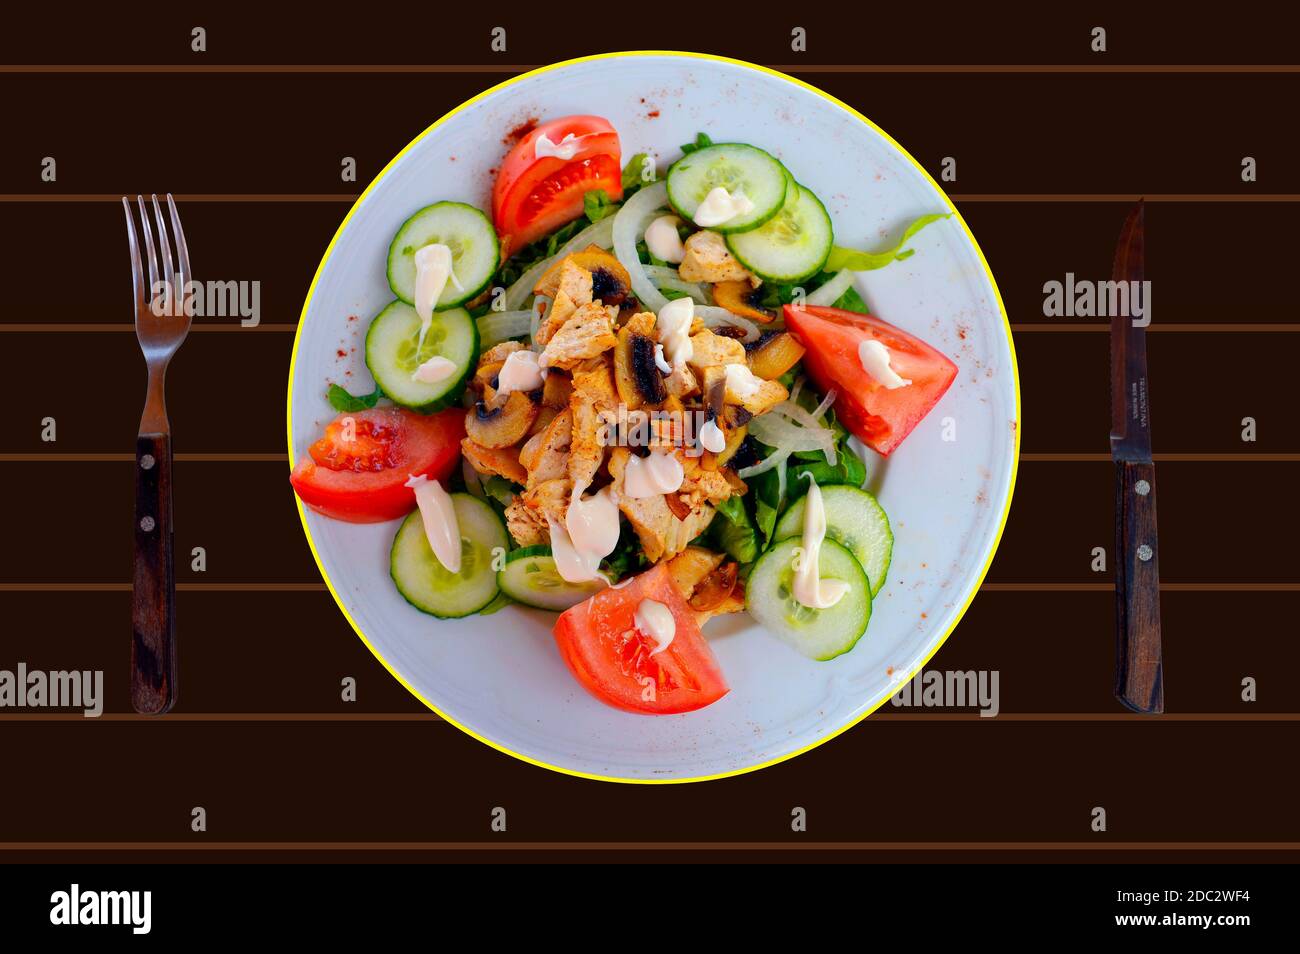 A plate of chicken and mushroom salad on a brown table Stock Photo